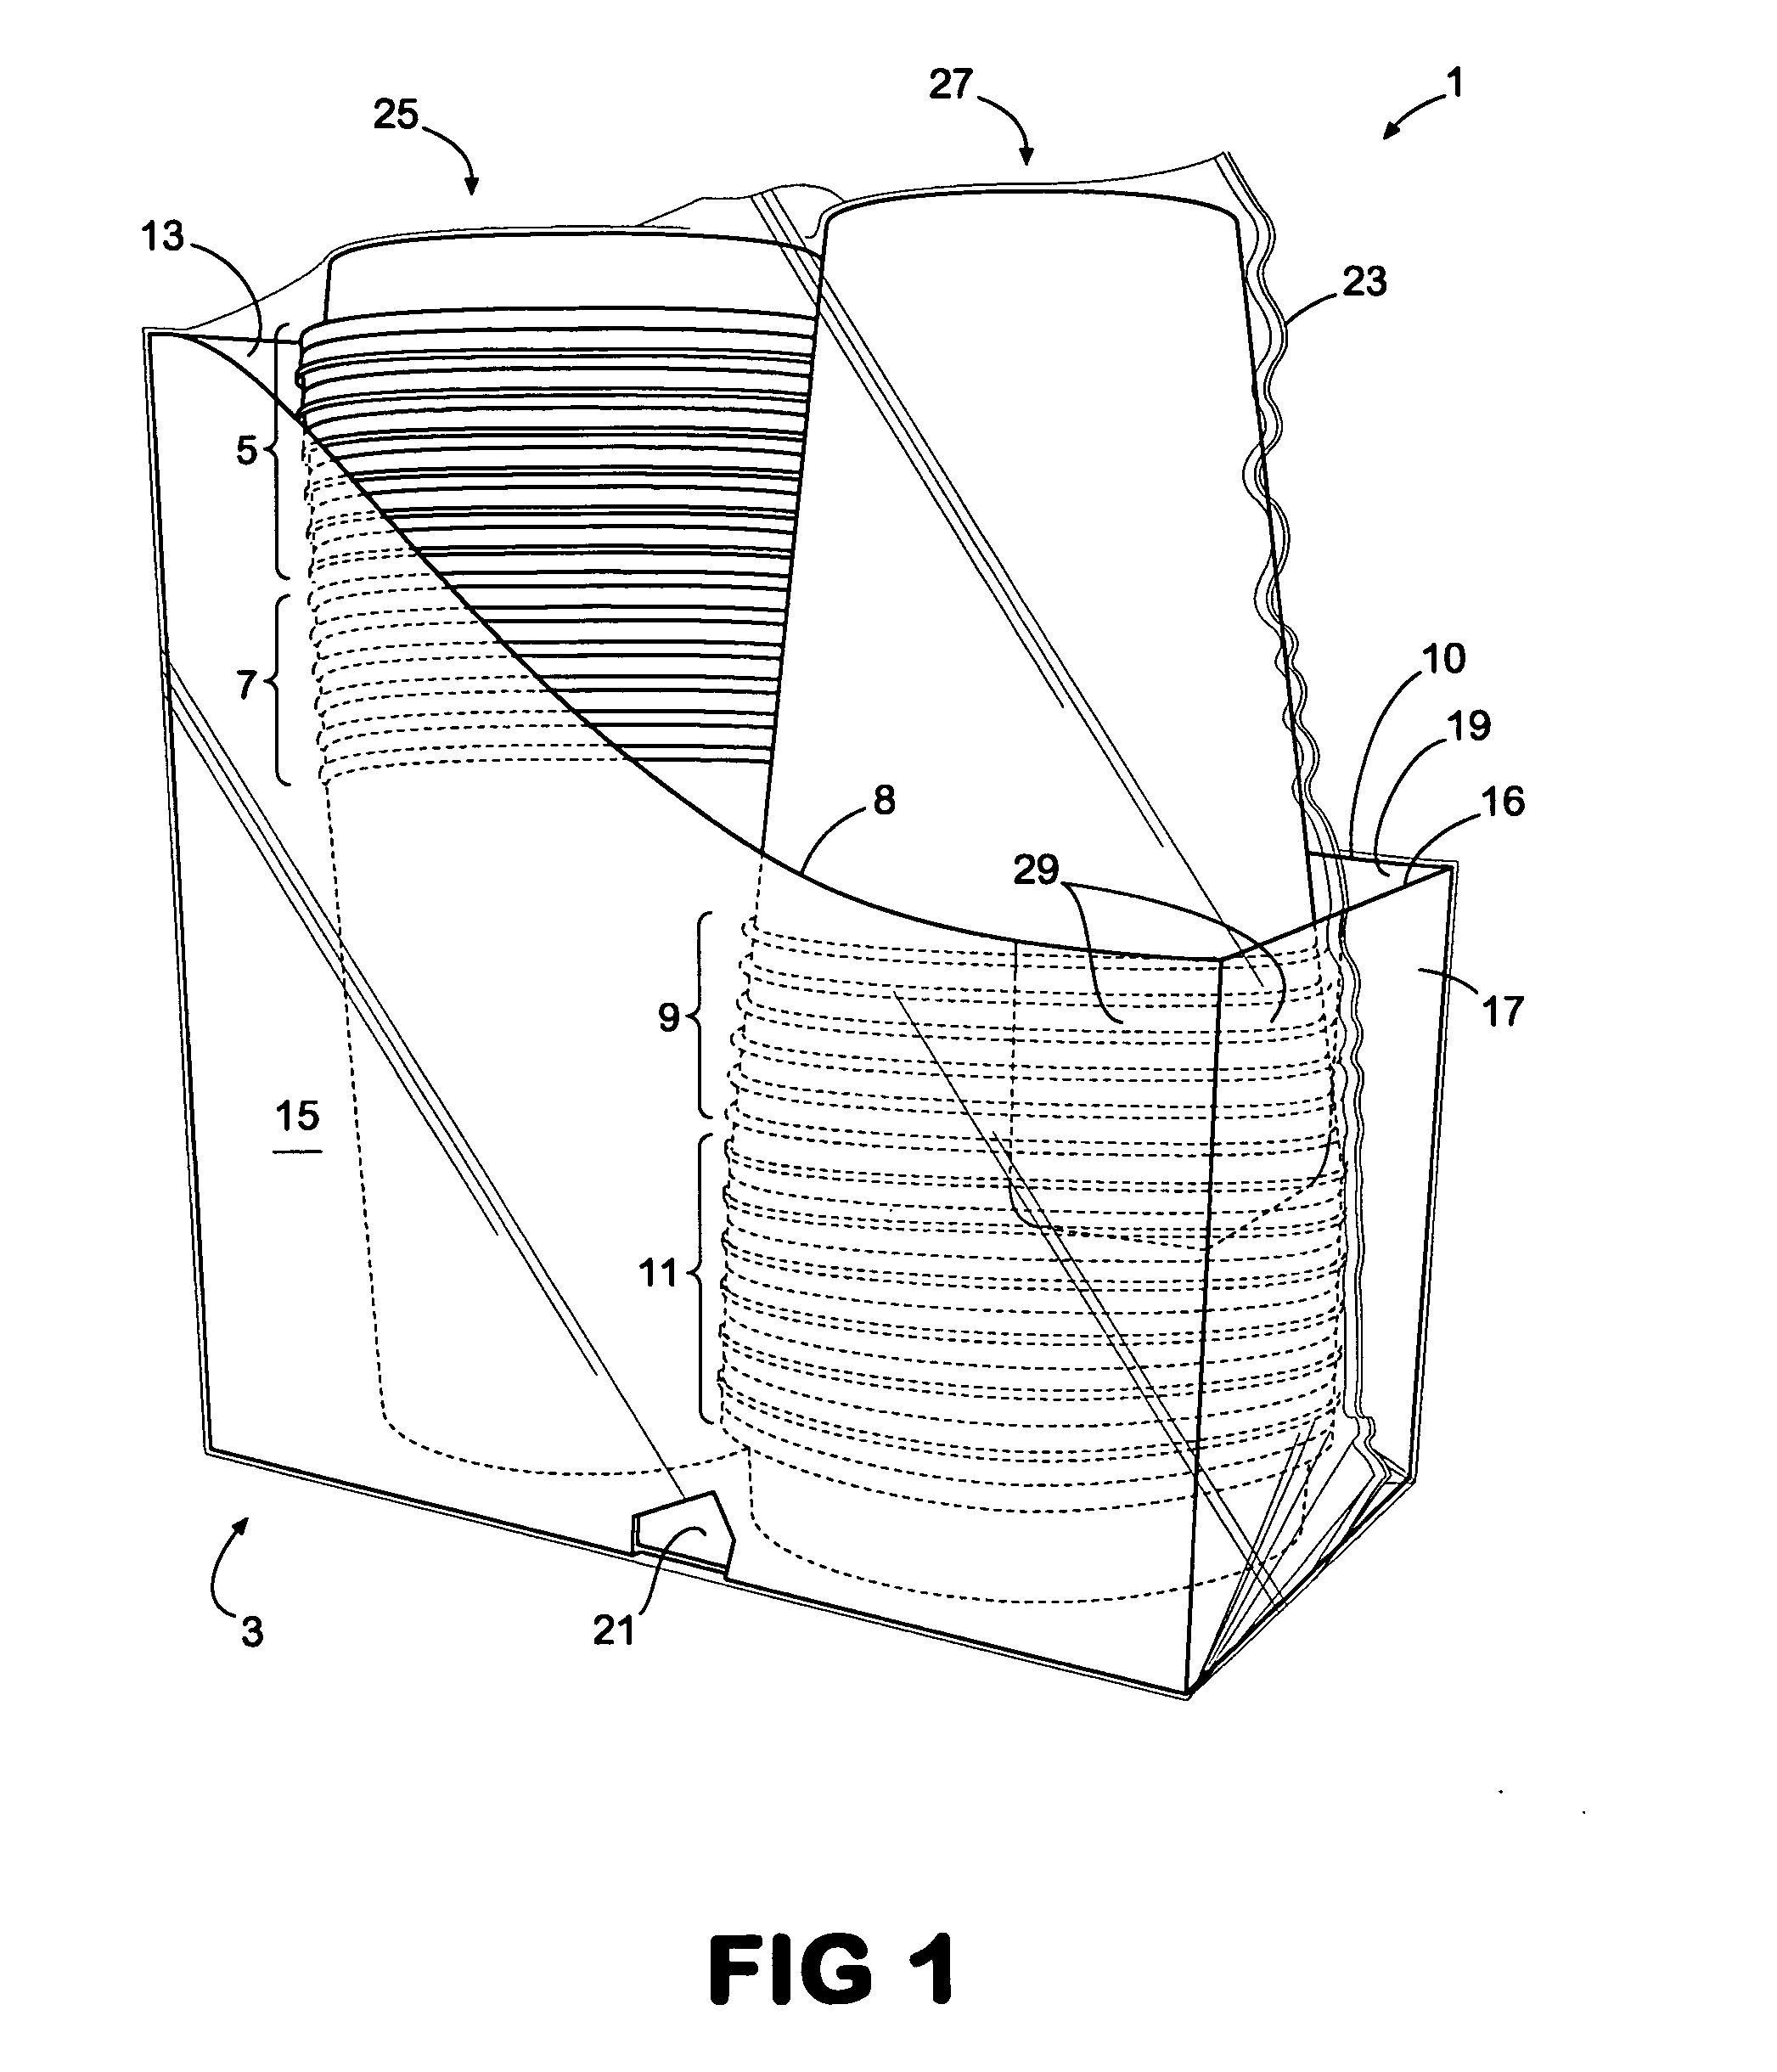 Product and method for dispensing and packaging items having complementary components